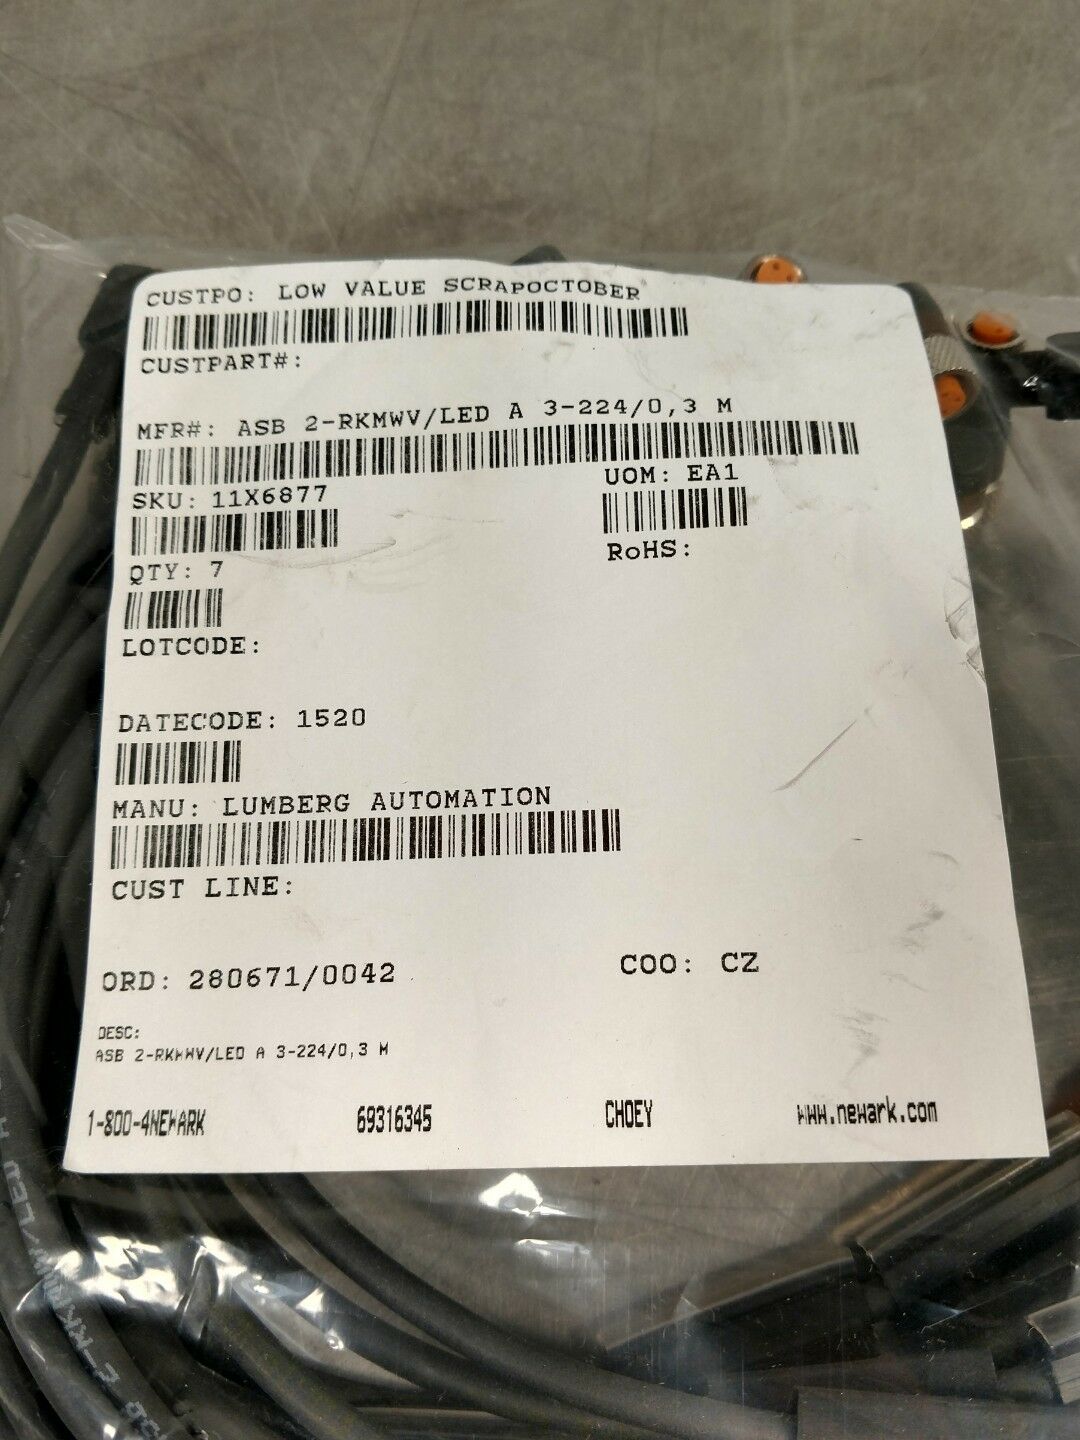 Lumberg Automation ASB 2-RKMWV/LED A 3-224/0 Cables Quantity-7 6A